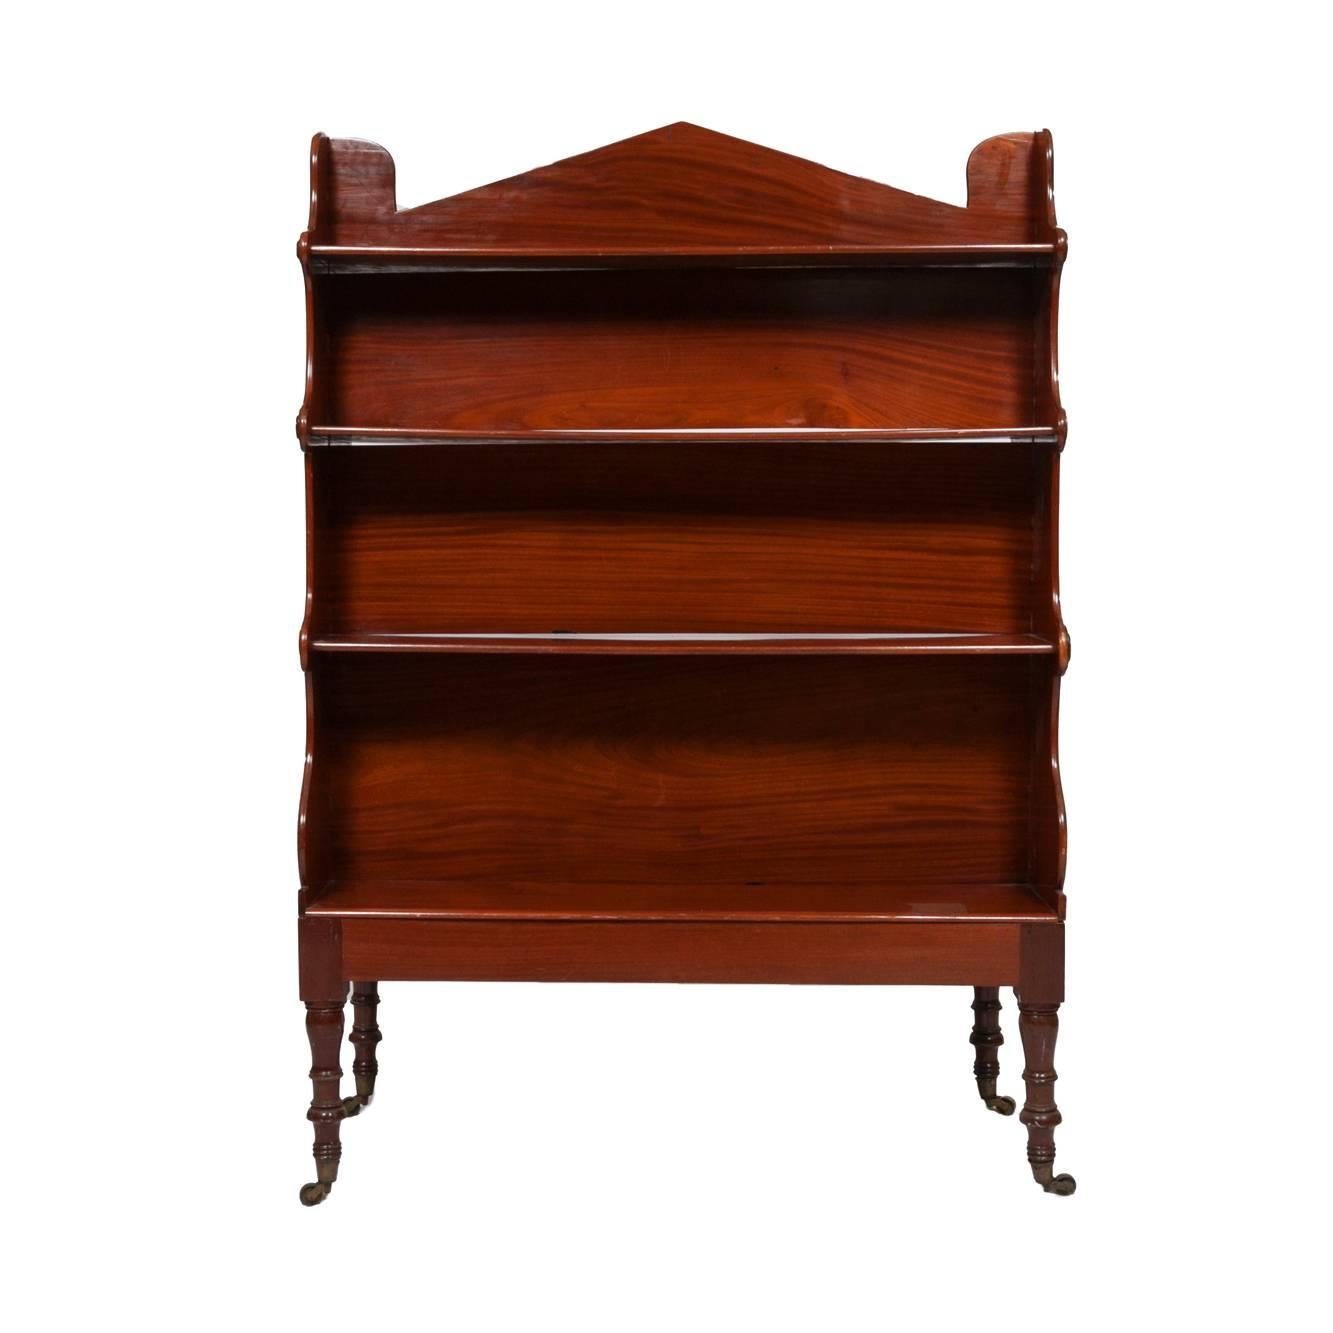 Early 19th century Georgian mahogany double-sided bookcase by Gillows of Lancaster. On castors.